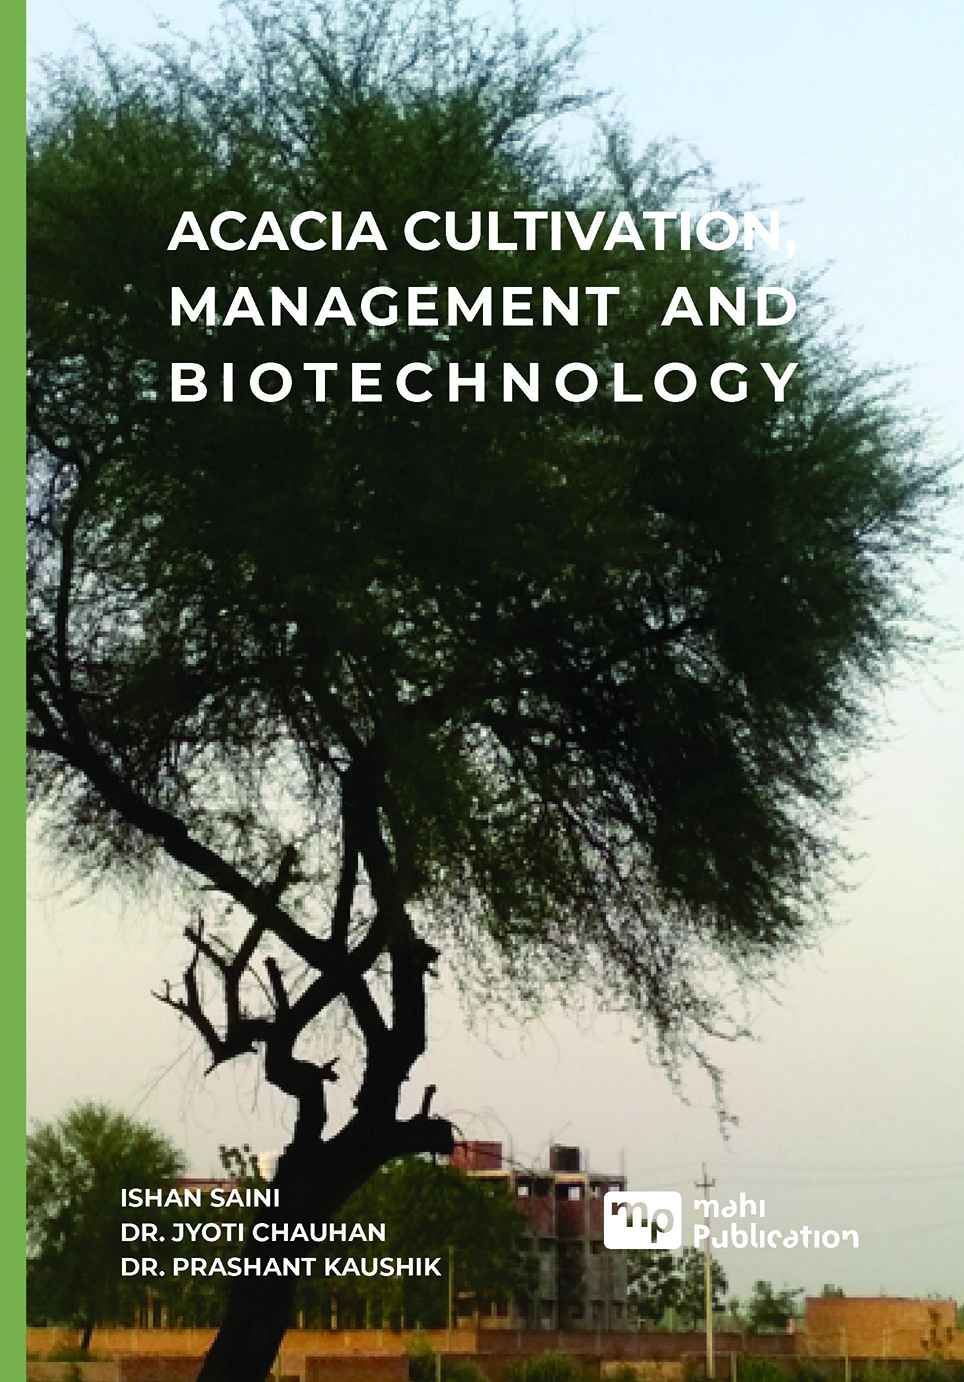 Acacia Cultivation, Management And Biotechnology